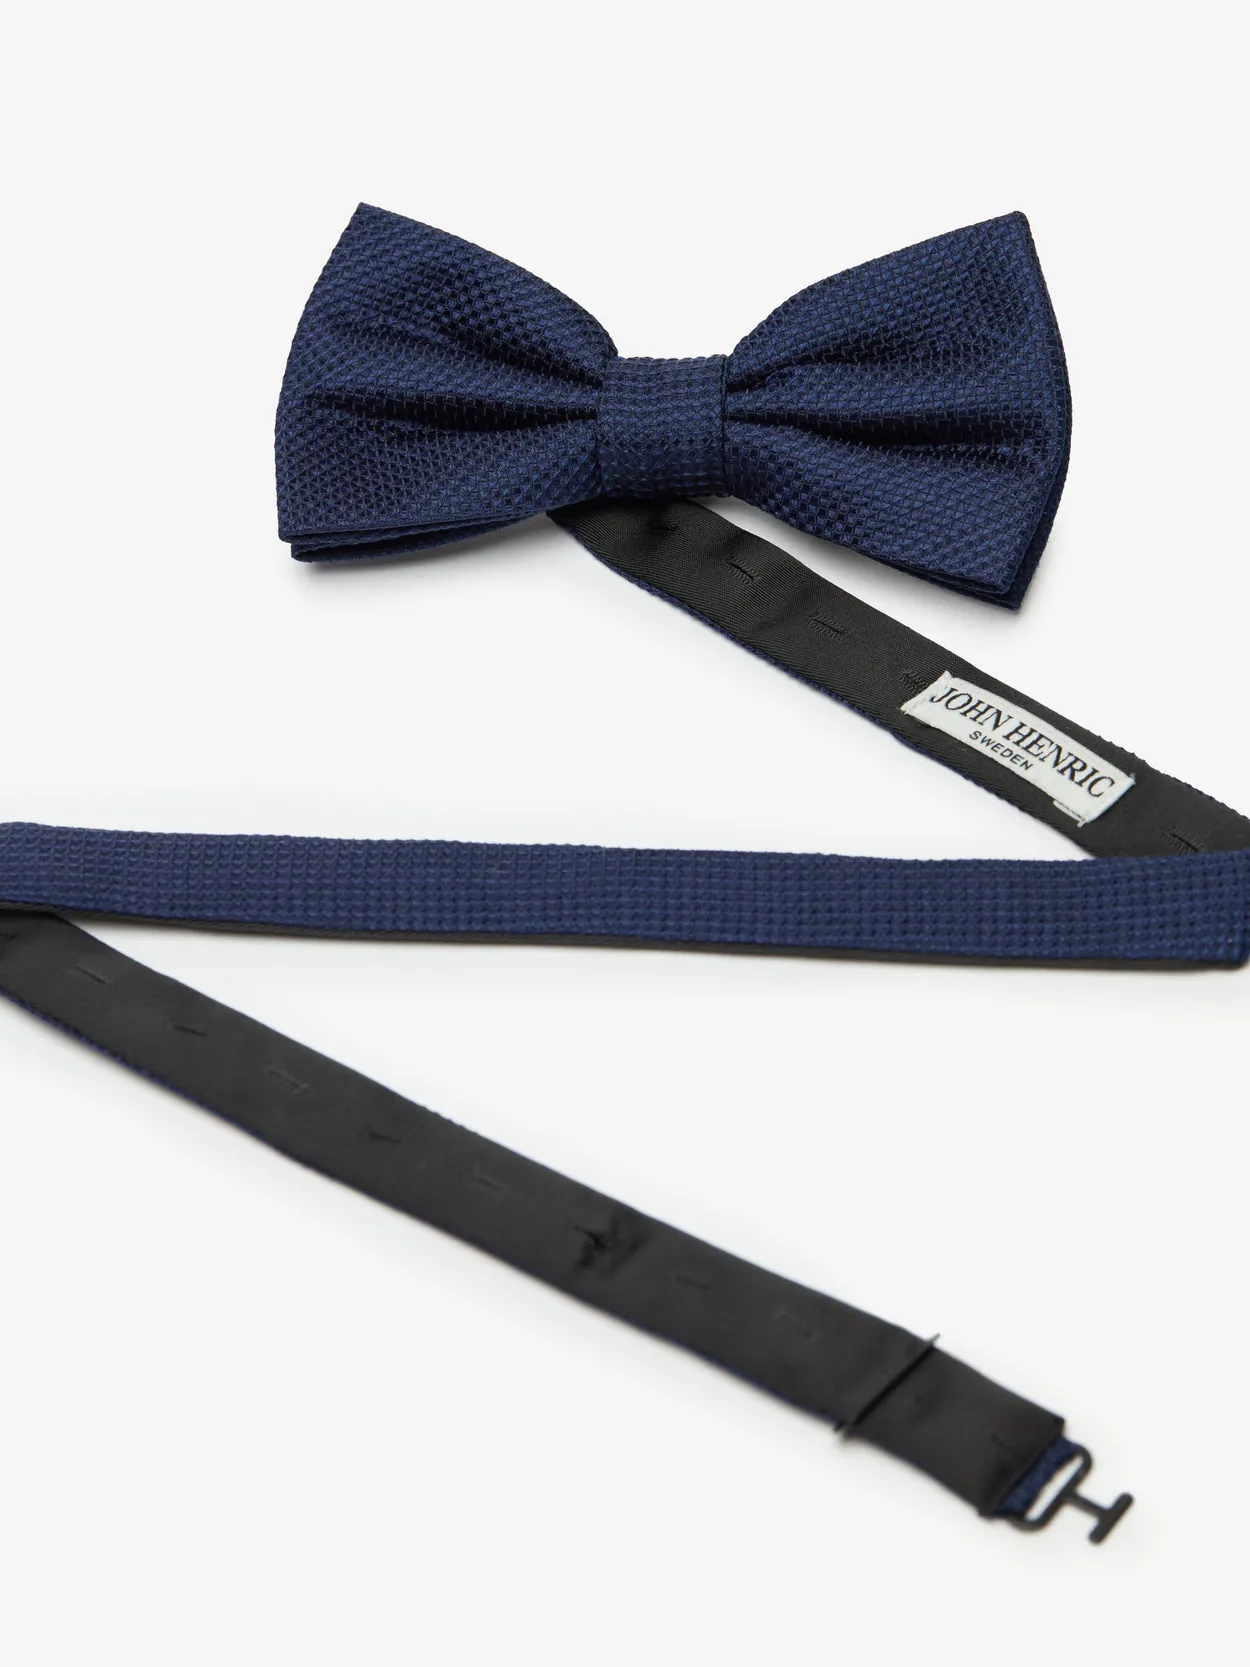 Blue Bow Tie Formal 